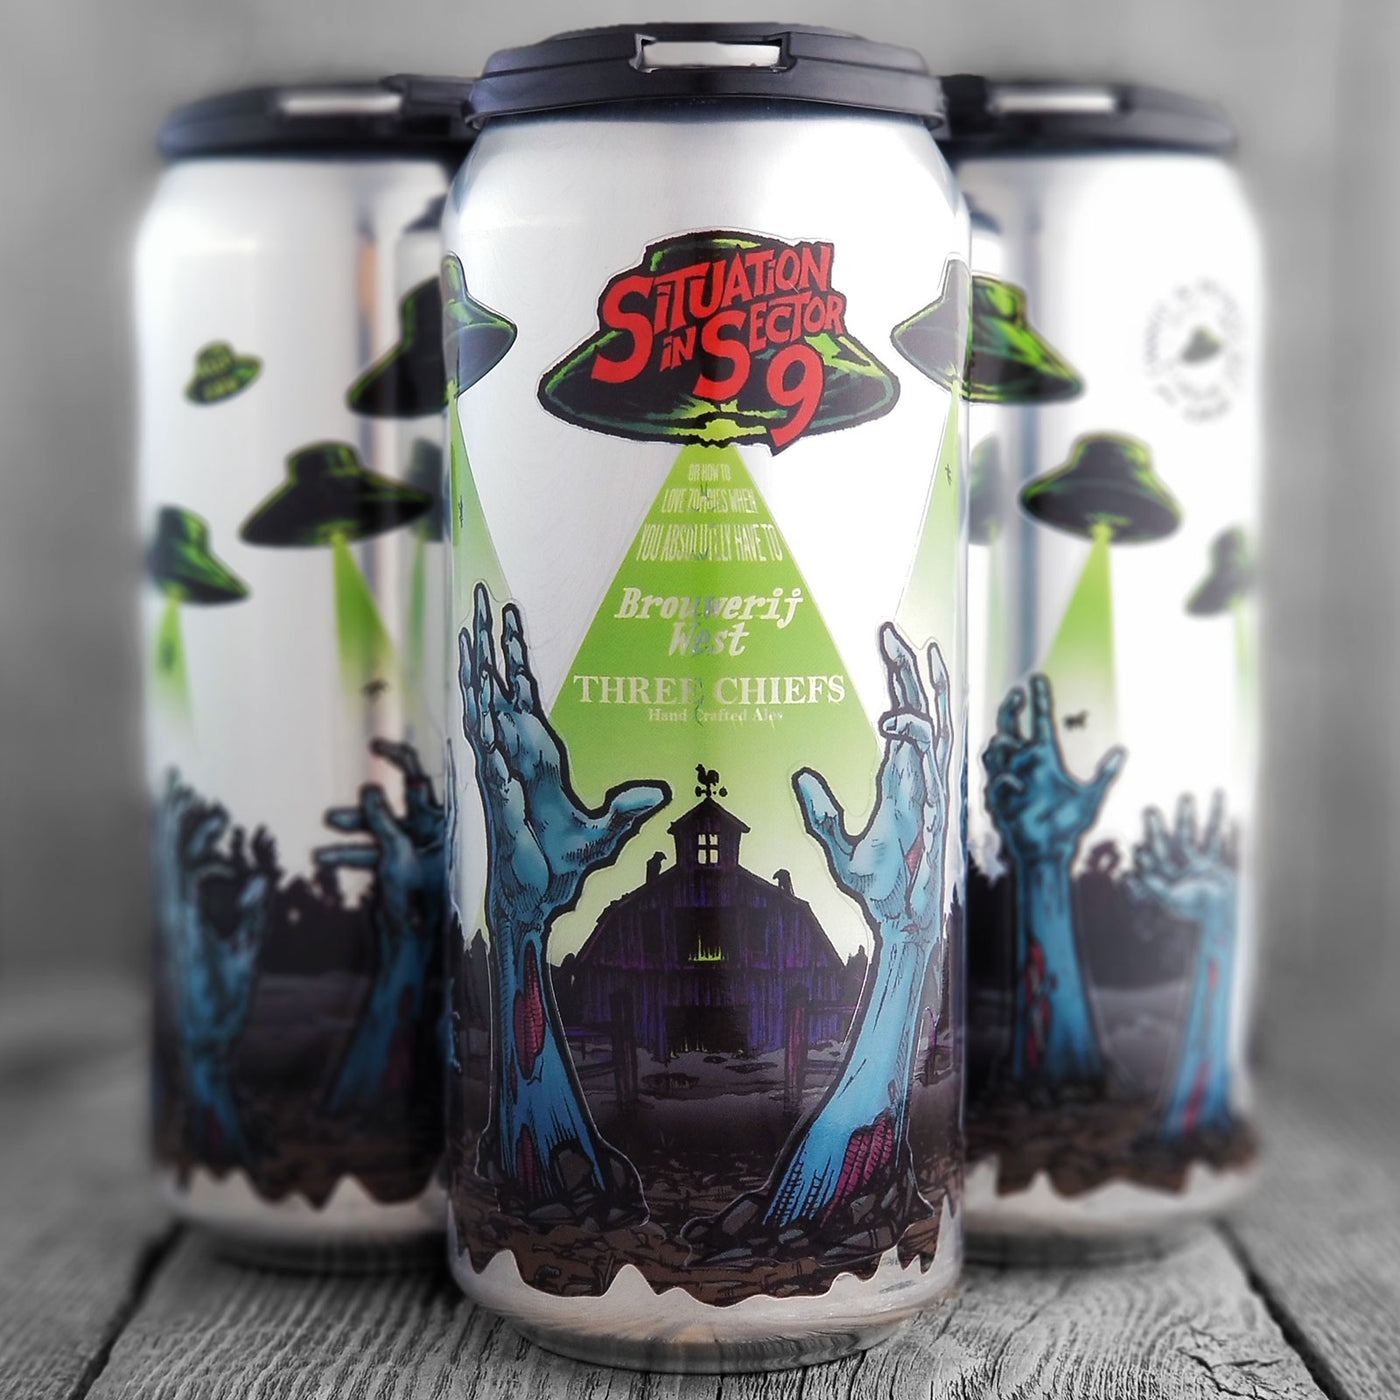 Brouwerij West / Three Chiefs - Situation In Sector 9